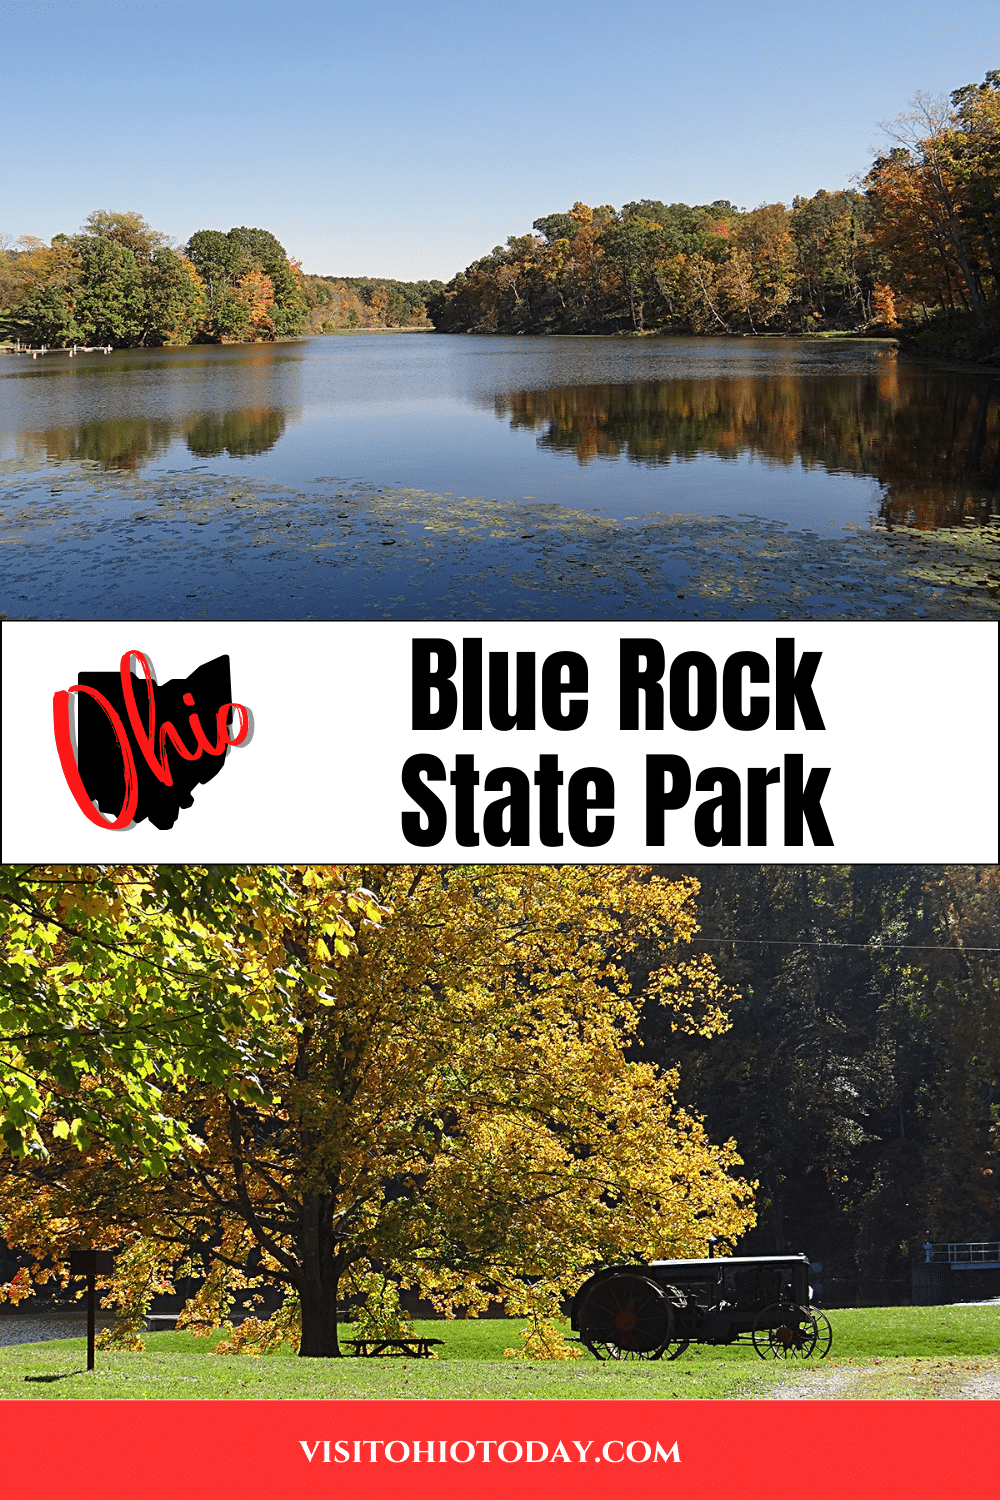 vertical image with a photo of the lake at blue rock state park at the top and a photo of a picnic area with an old tractor at blue rock state park at the bottom. A white strip across the center has the text Blue Rock State Park